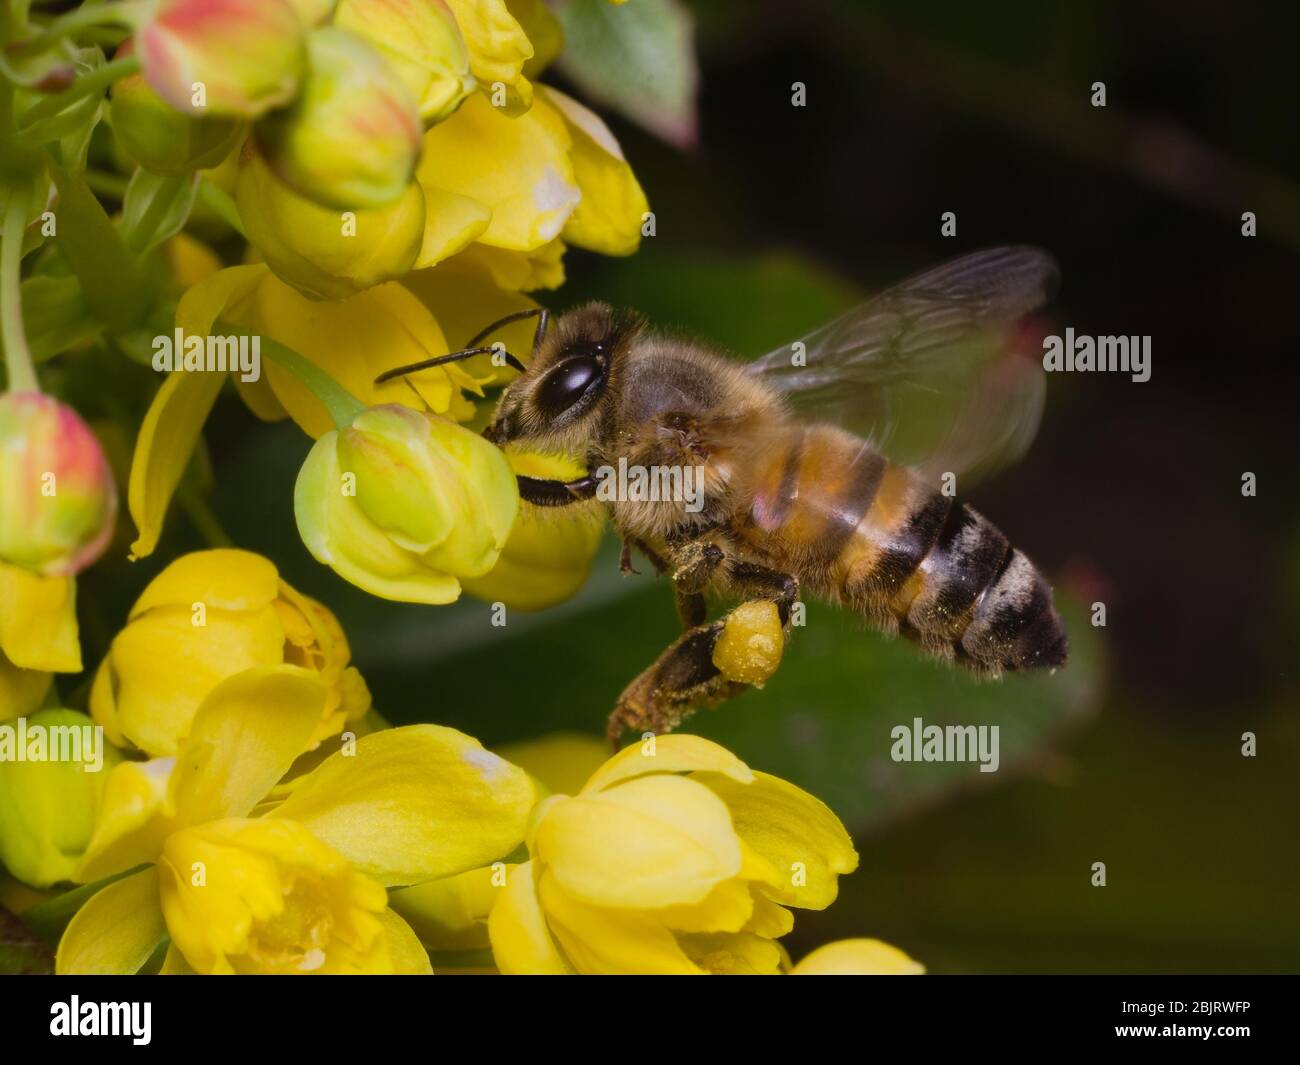 Foraging bee flying in front of a yellow flower looking for pollen Stock Photo